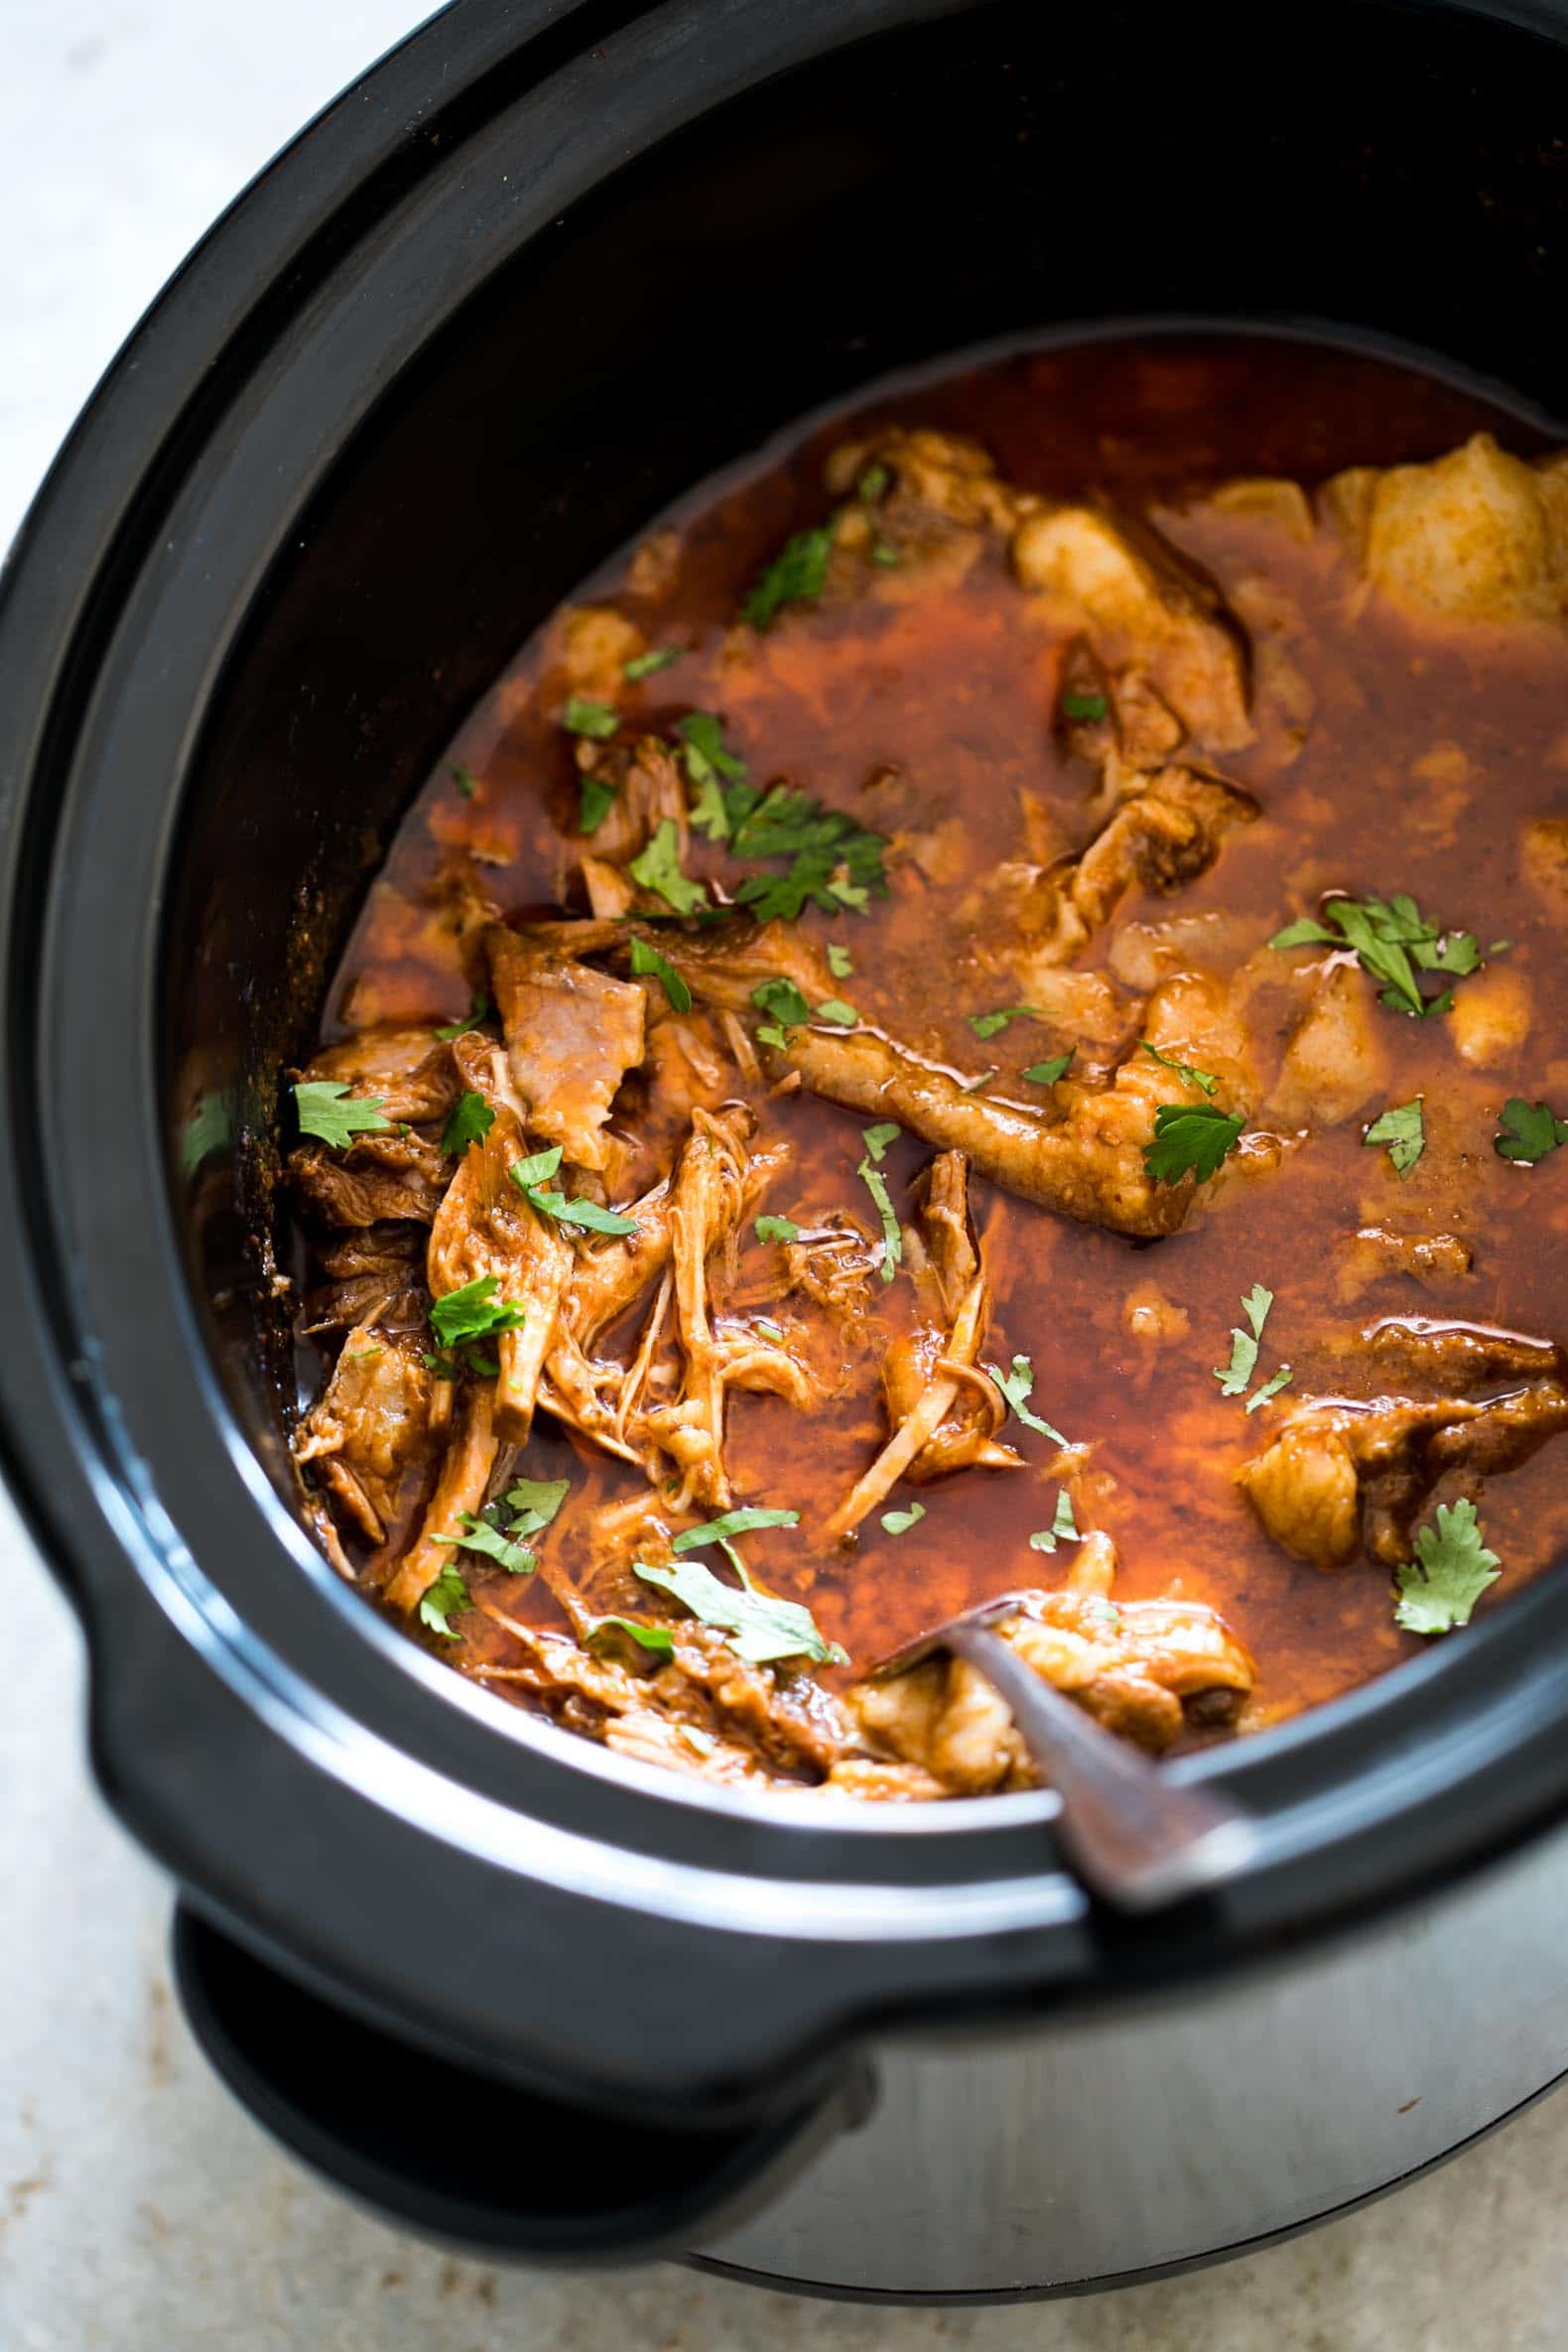 This slow cooker Chipotle BBQ Pulled Pork has all the right flavors - smoky, spicy and insanely delicious. Perfect for tacos, burritos with just 5 minutes of prep.